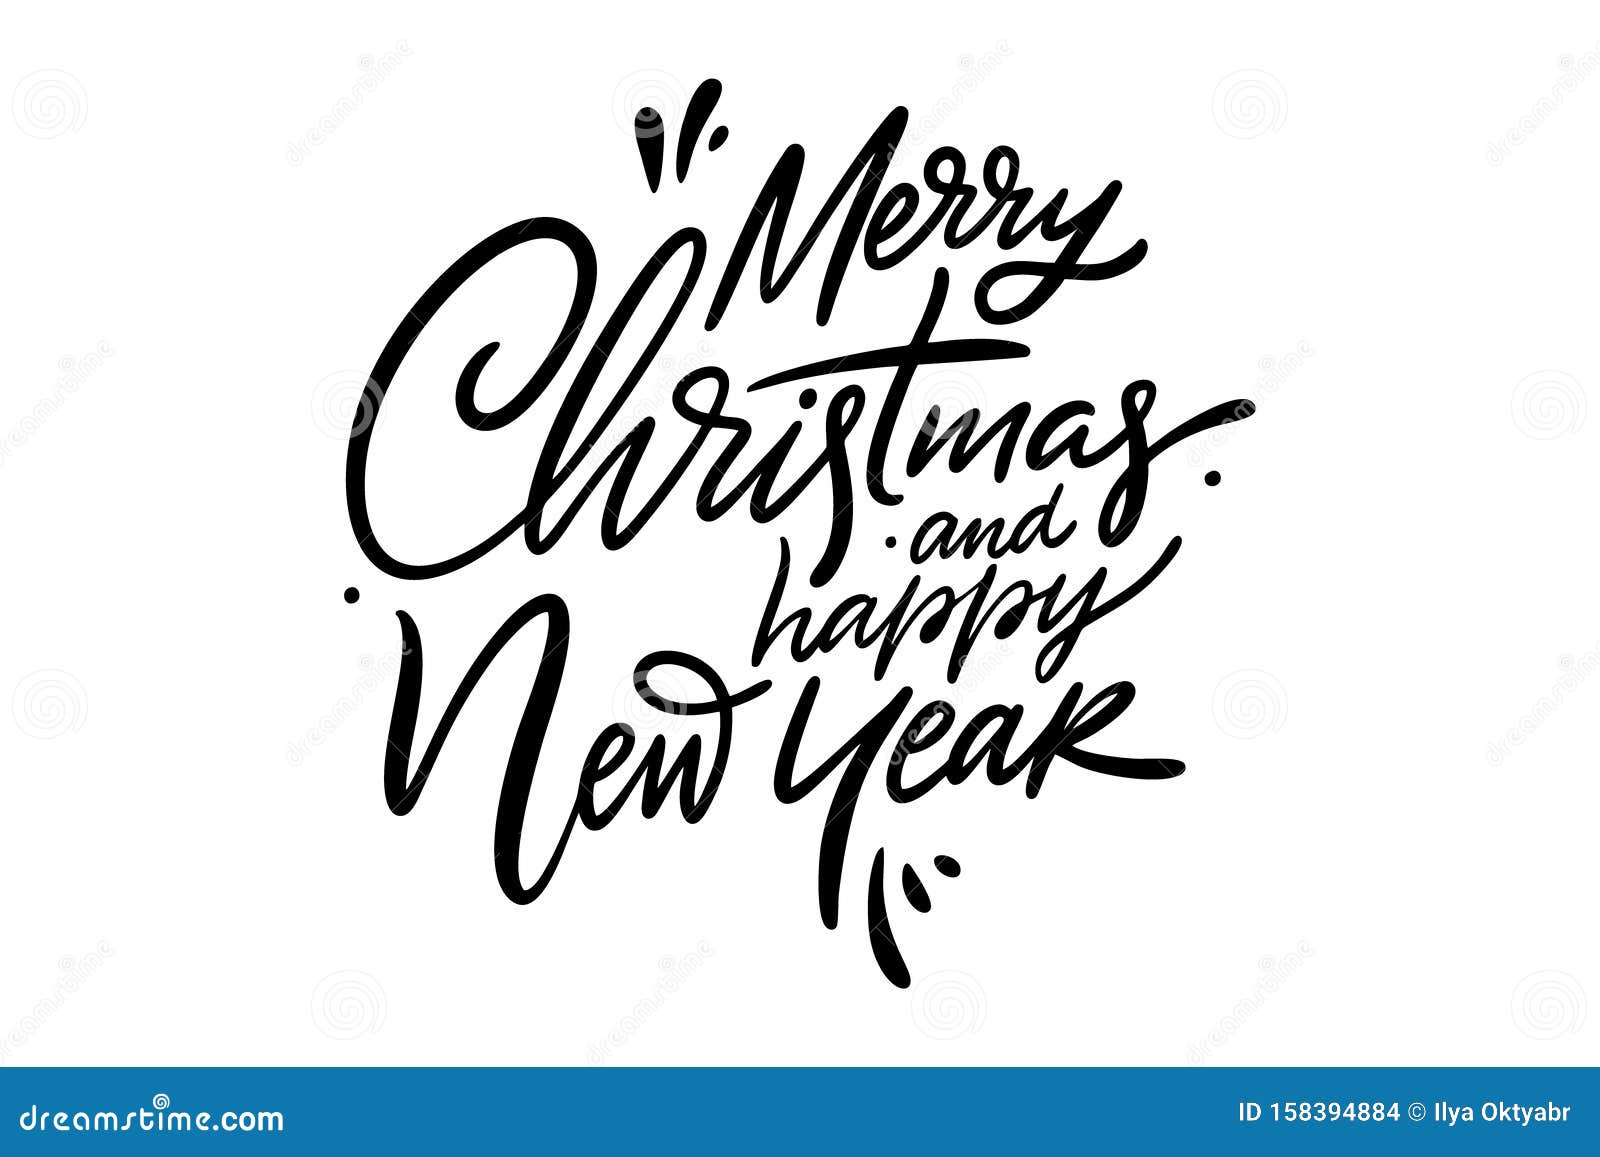 Merry Christmas and Happy New Year Hand Drawn Vector Lettering. Stock ...